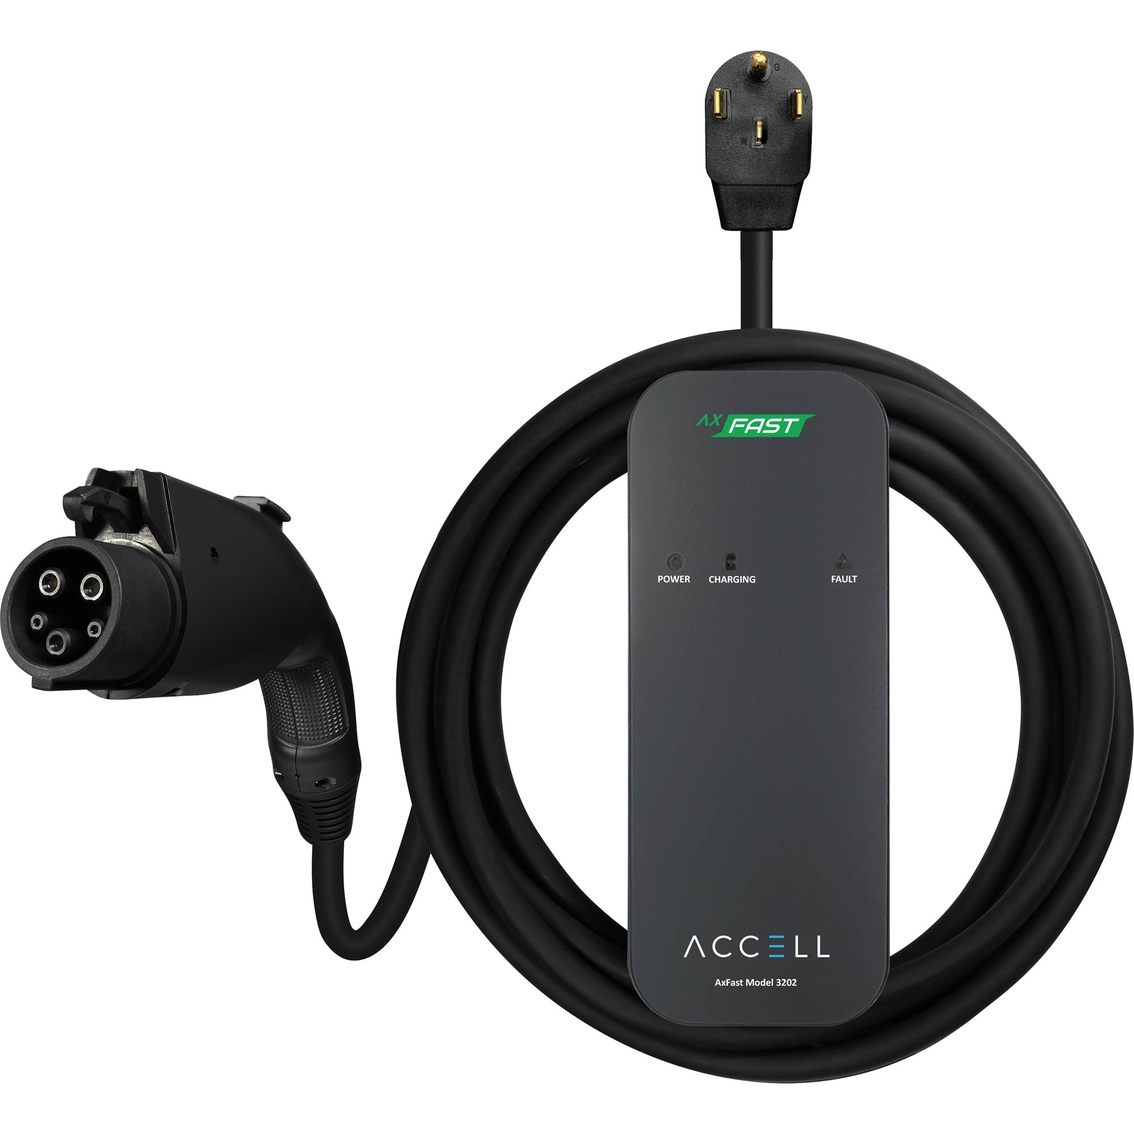 Accell AxFAST 32A Level 2 240V Electric Car Charger, P-240VUSA-3202 - Image 1 of 9